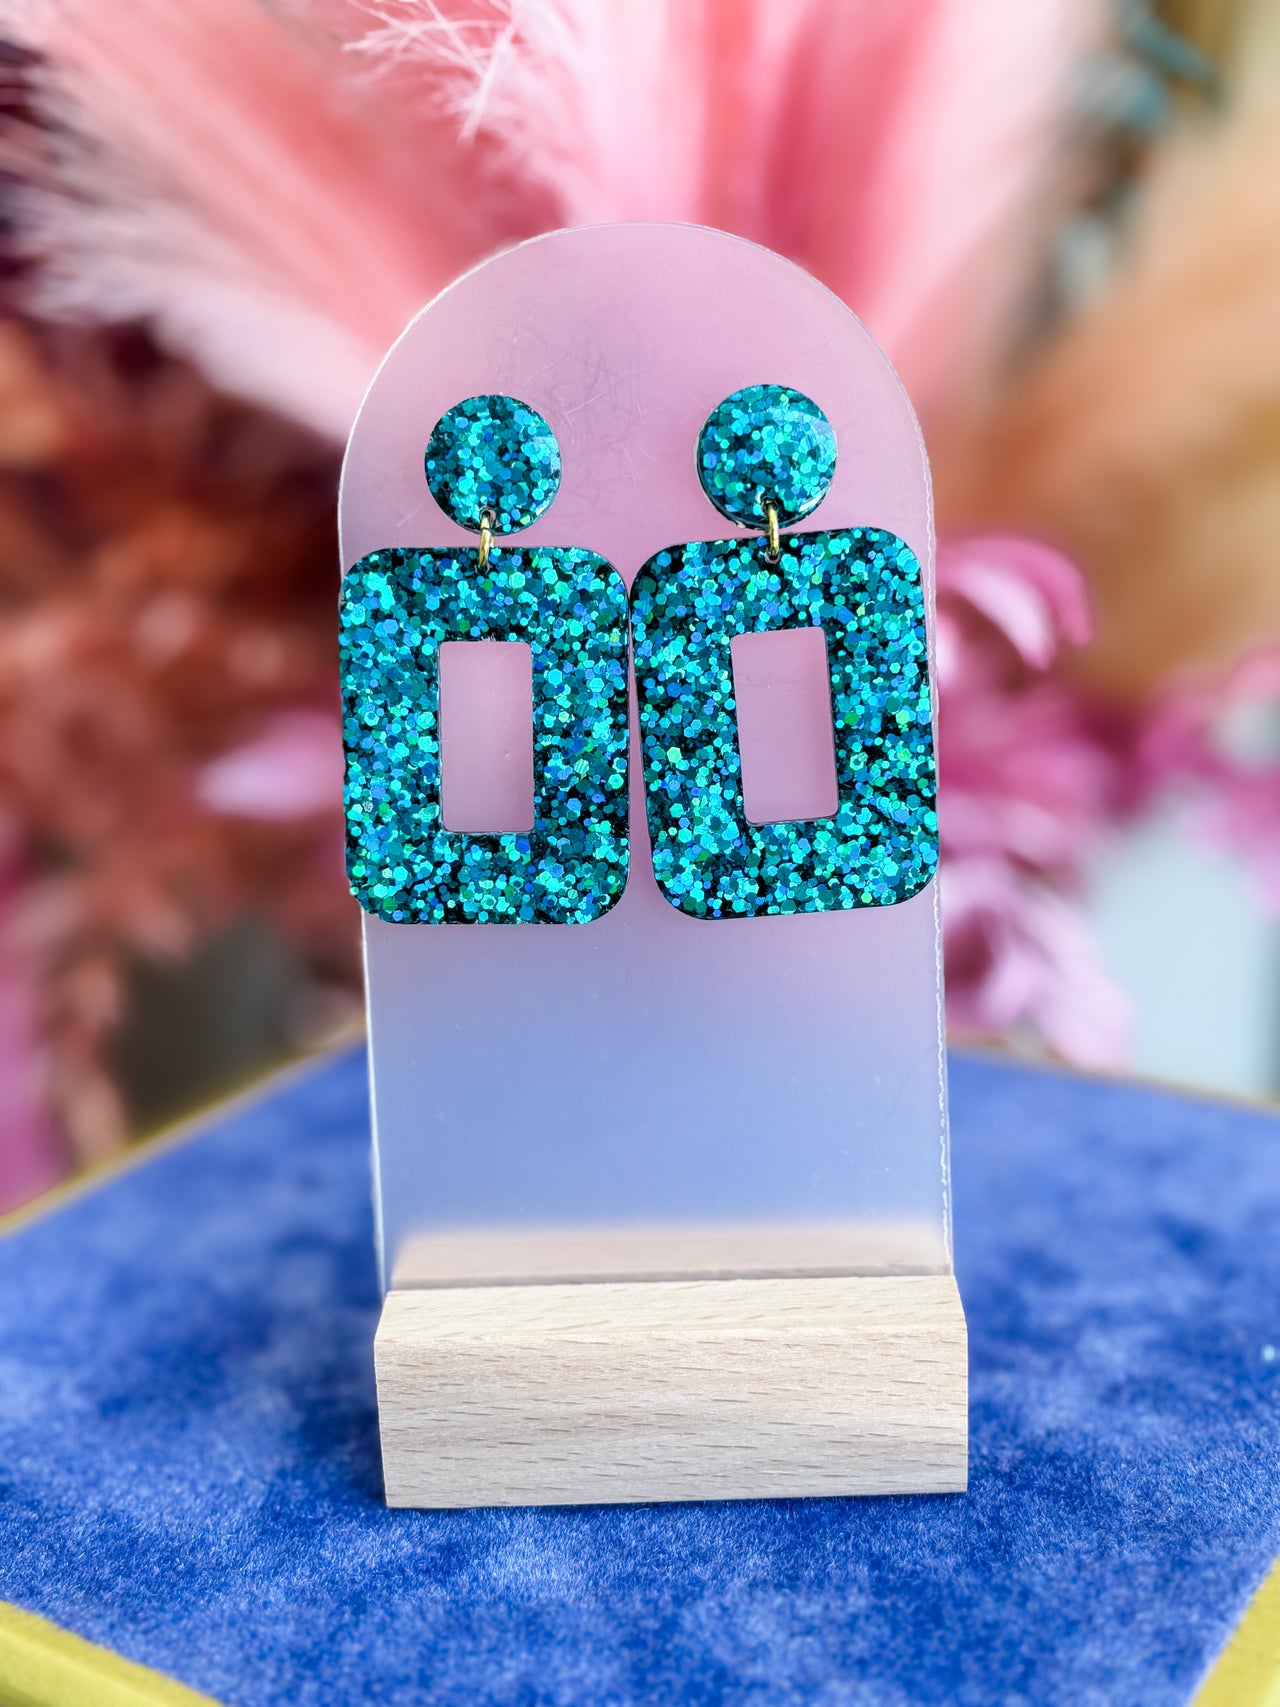 Medium Chunky Turquoise Open Square Earrings